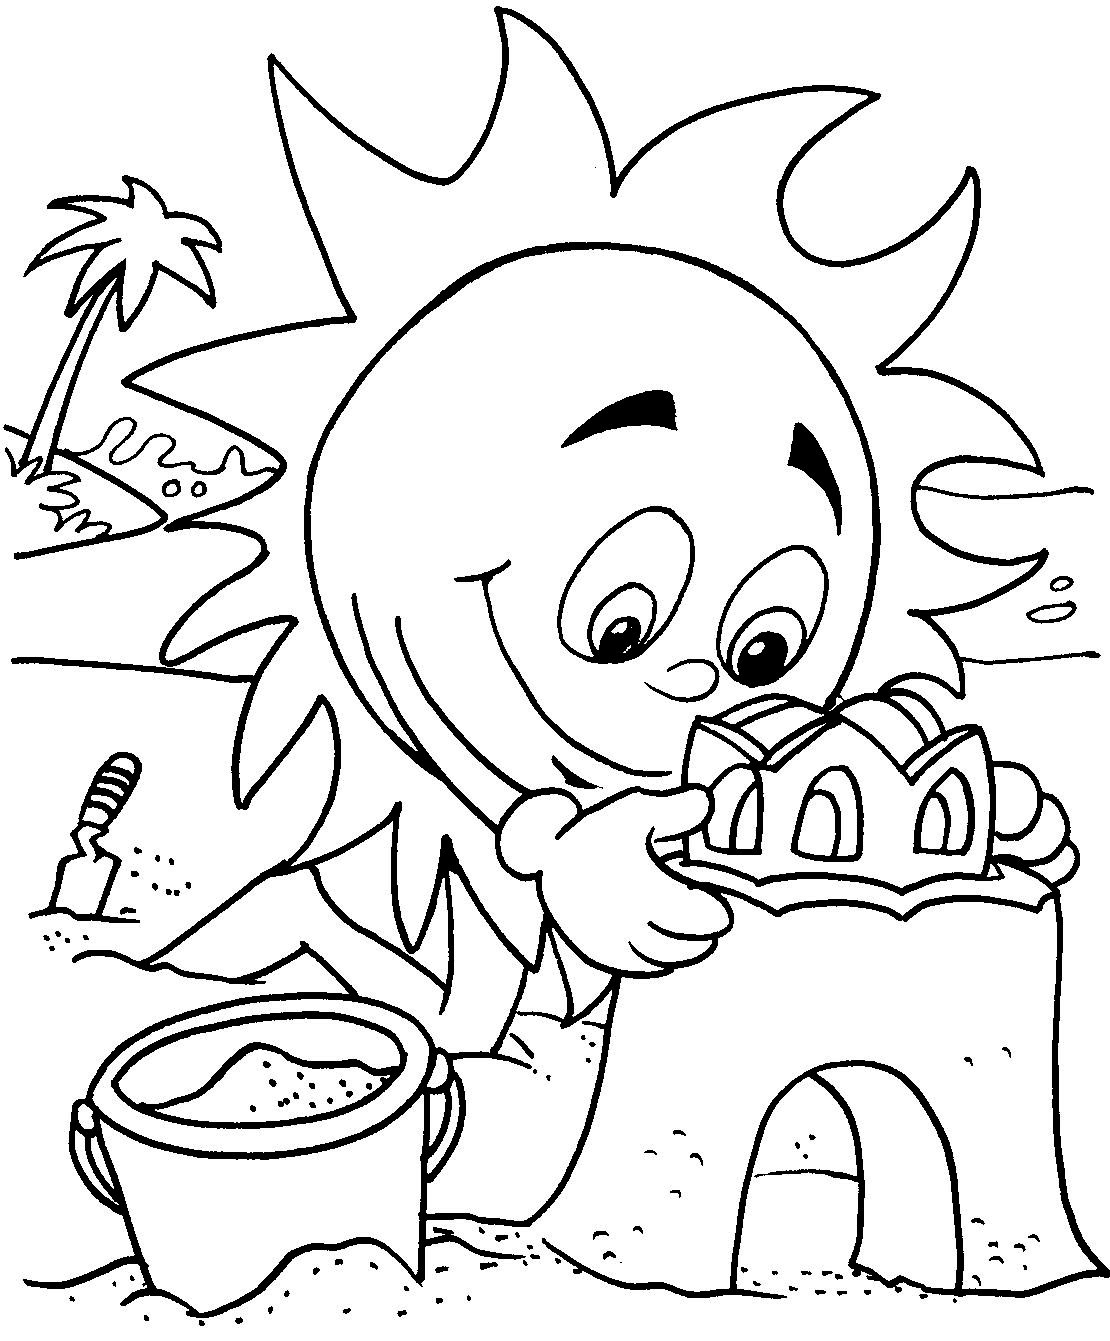 Summer Season Coloring Pages at GetDrawings | Free download